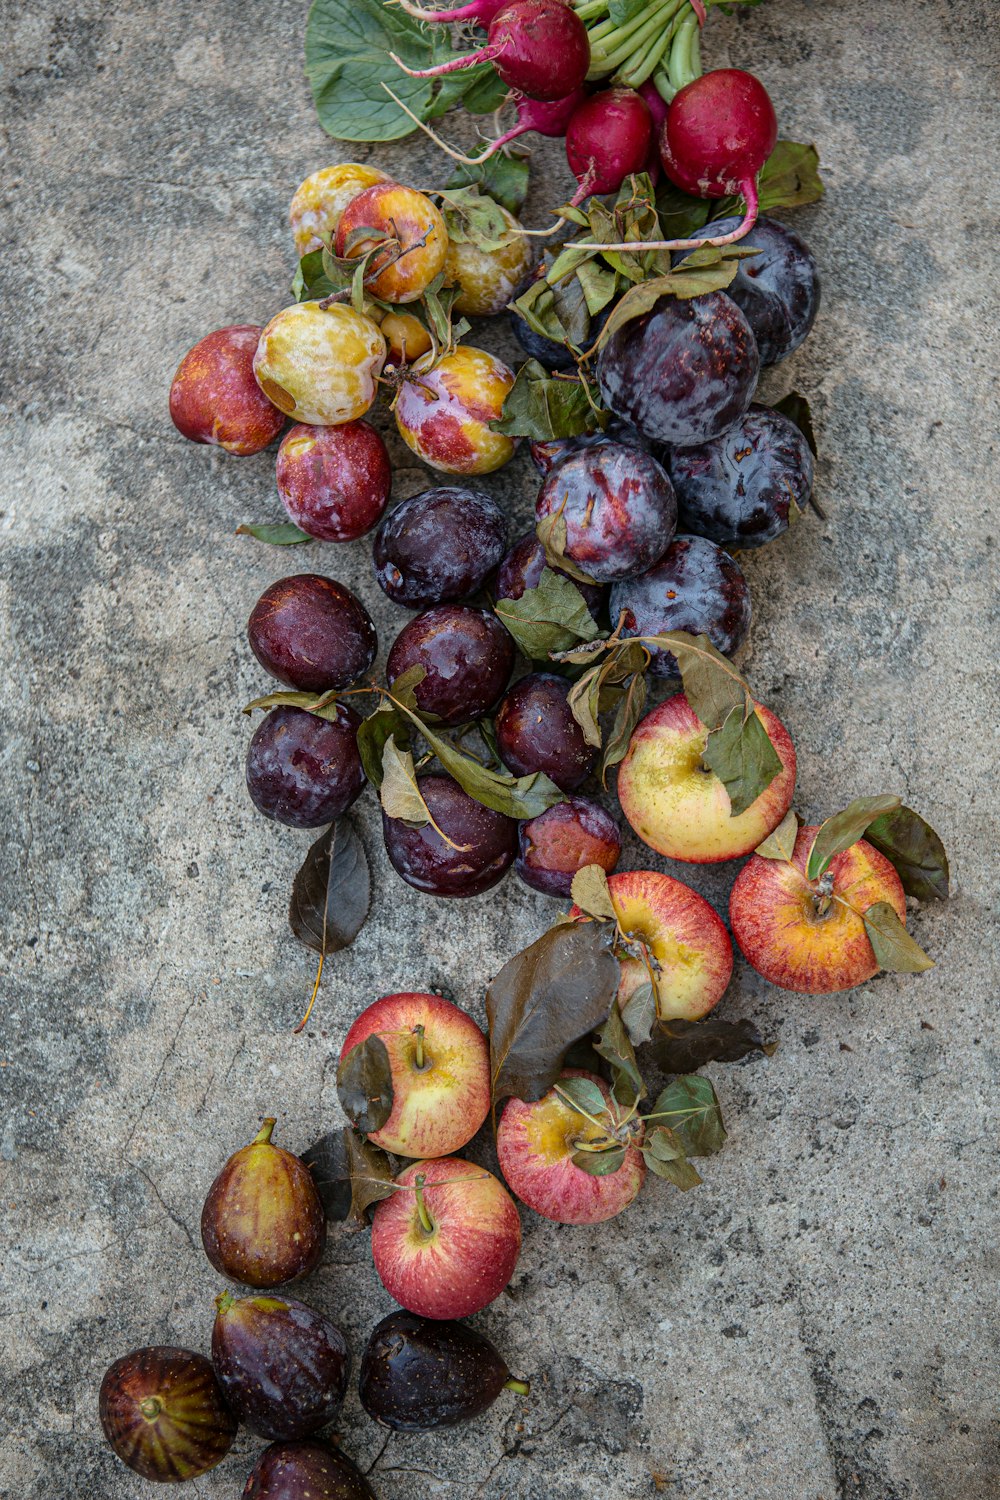 red and yellow apple fruits on gray concrete floor